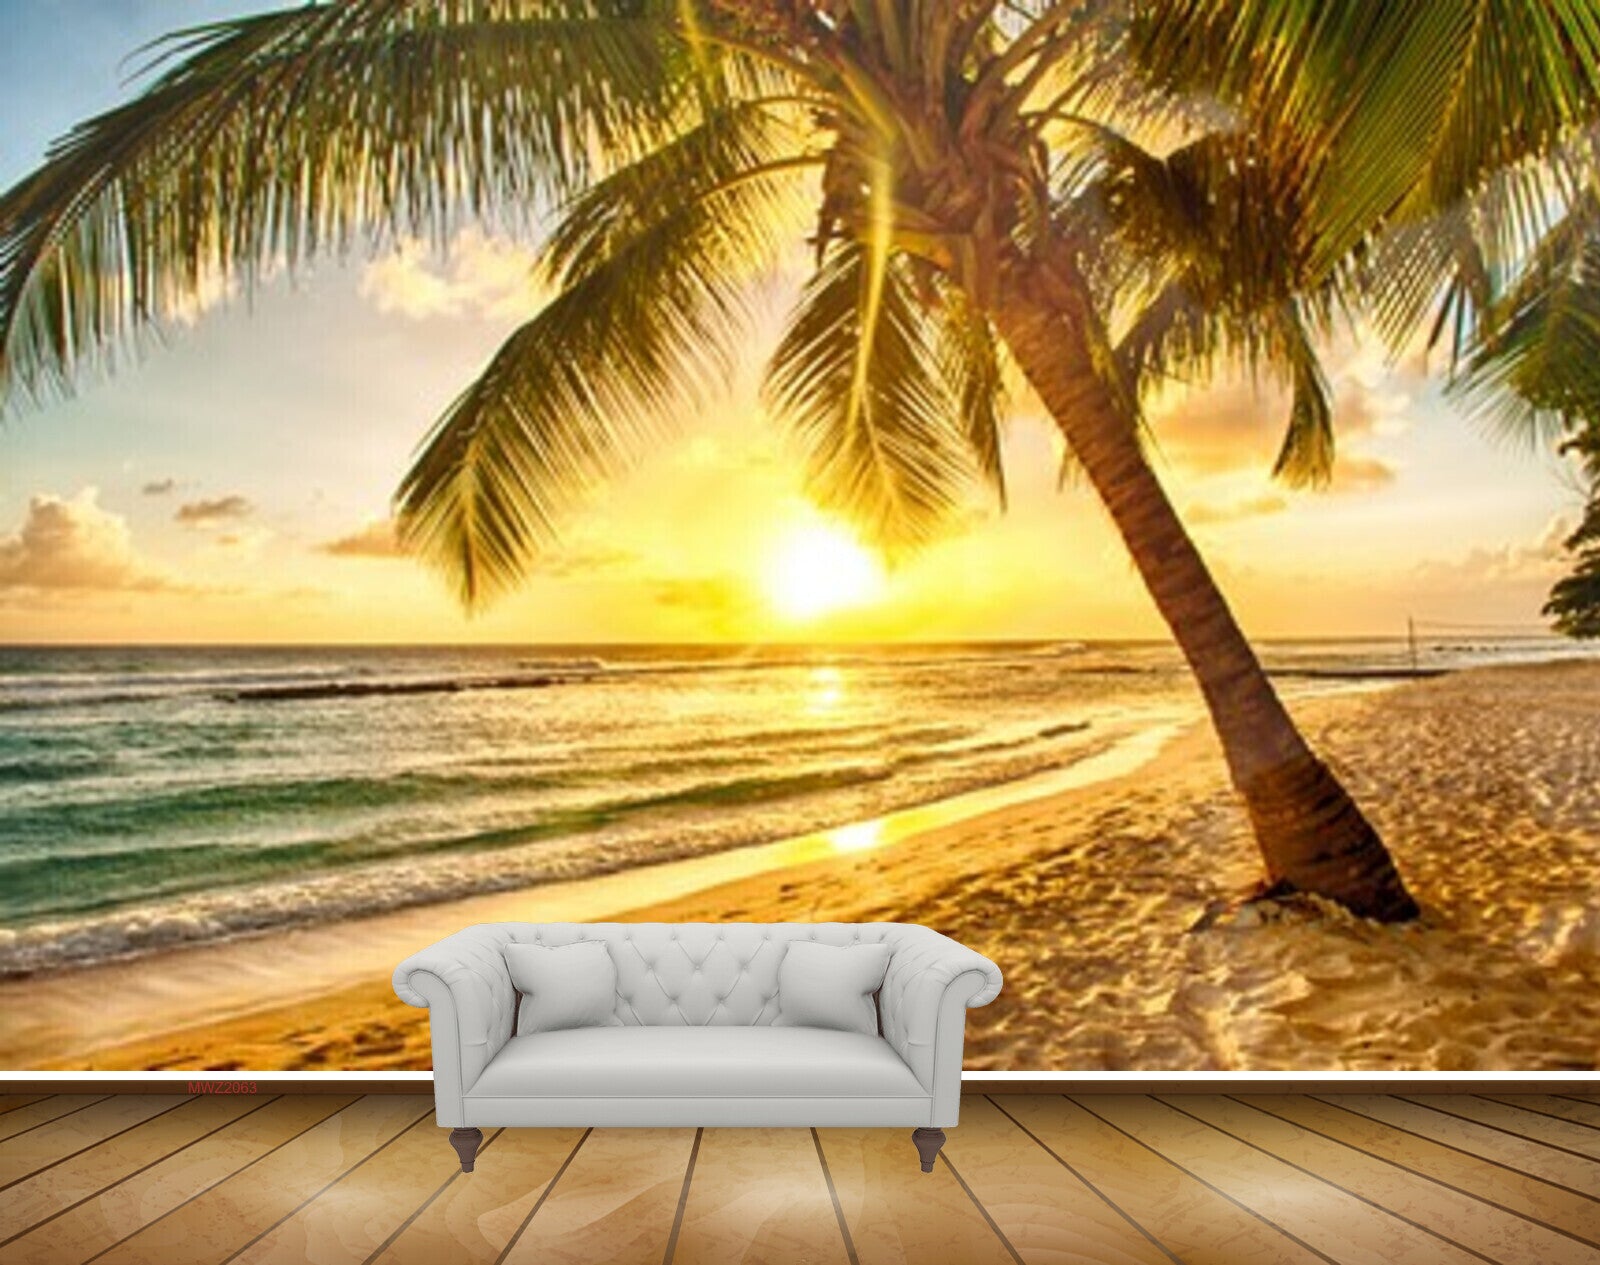 Palm Tree Sunset Wallpapers  Top 25 Best Palm Tree Sunset Wallpapers  Download